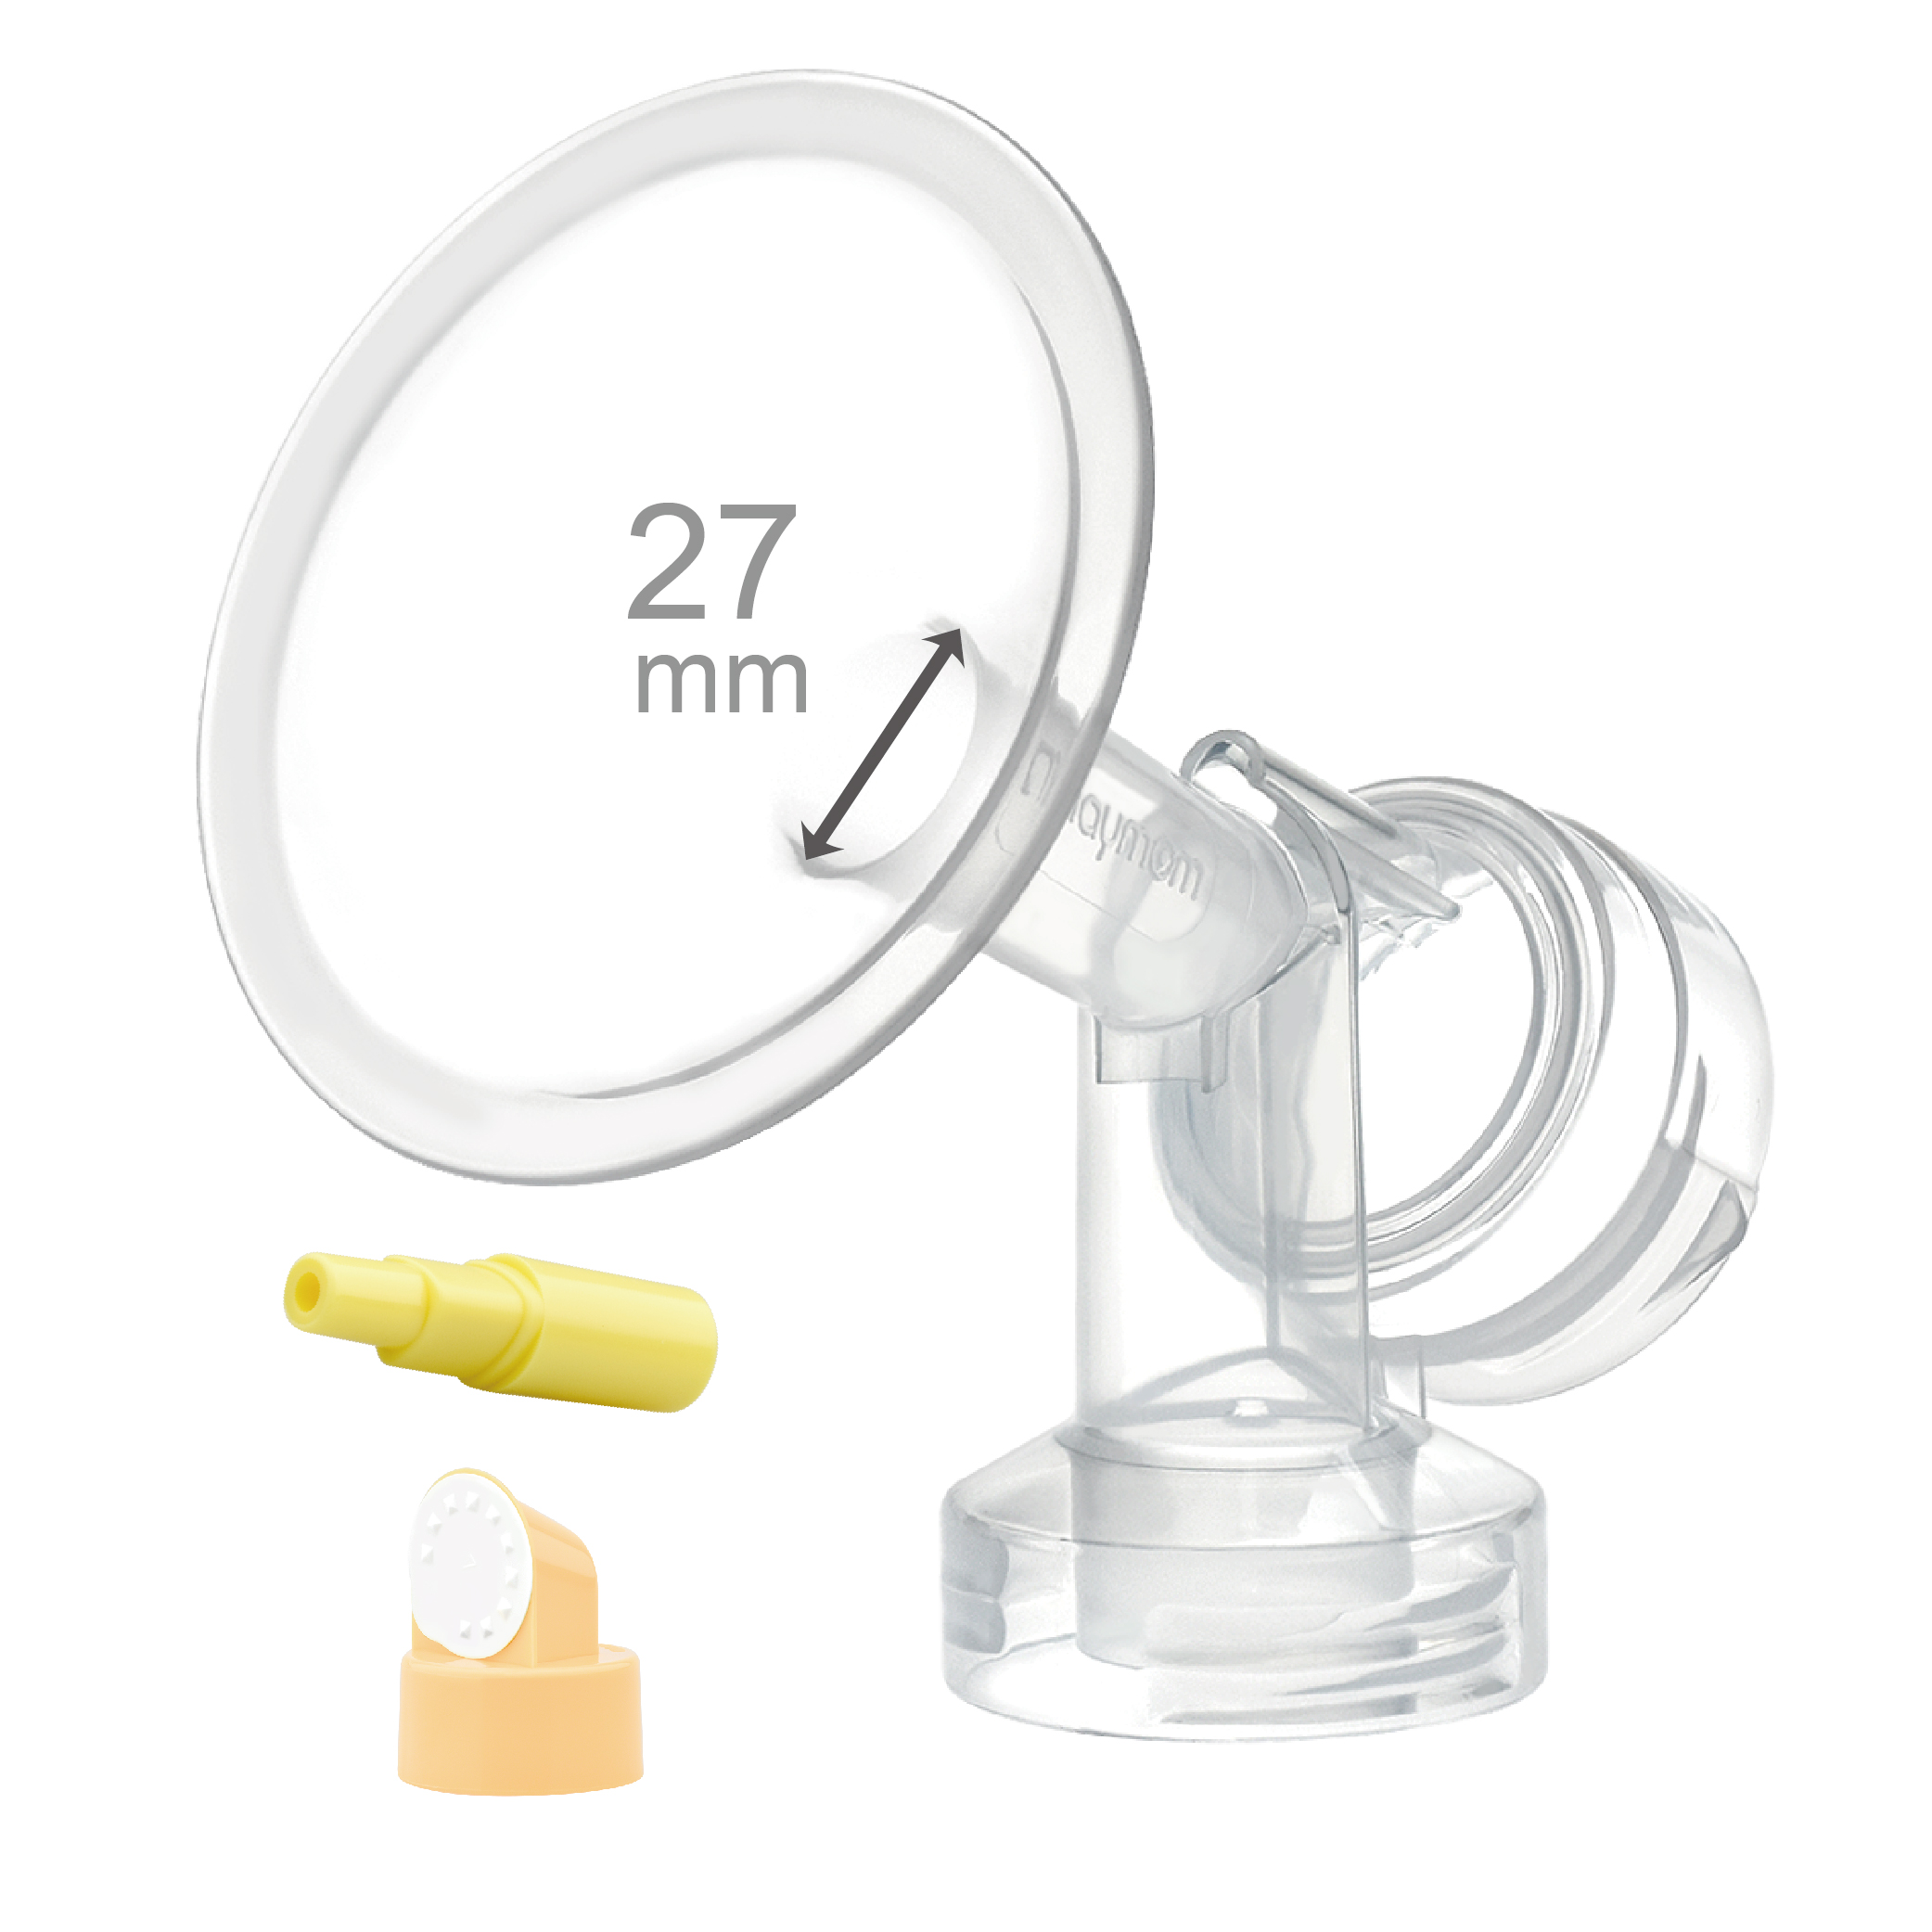 Breast Pump Parts  Maymom Flange for Spectra with valve